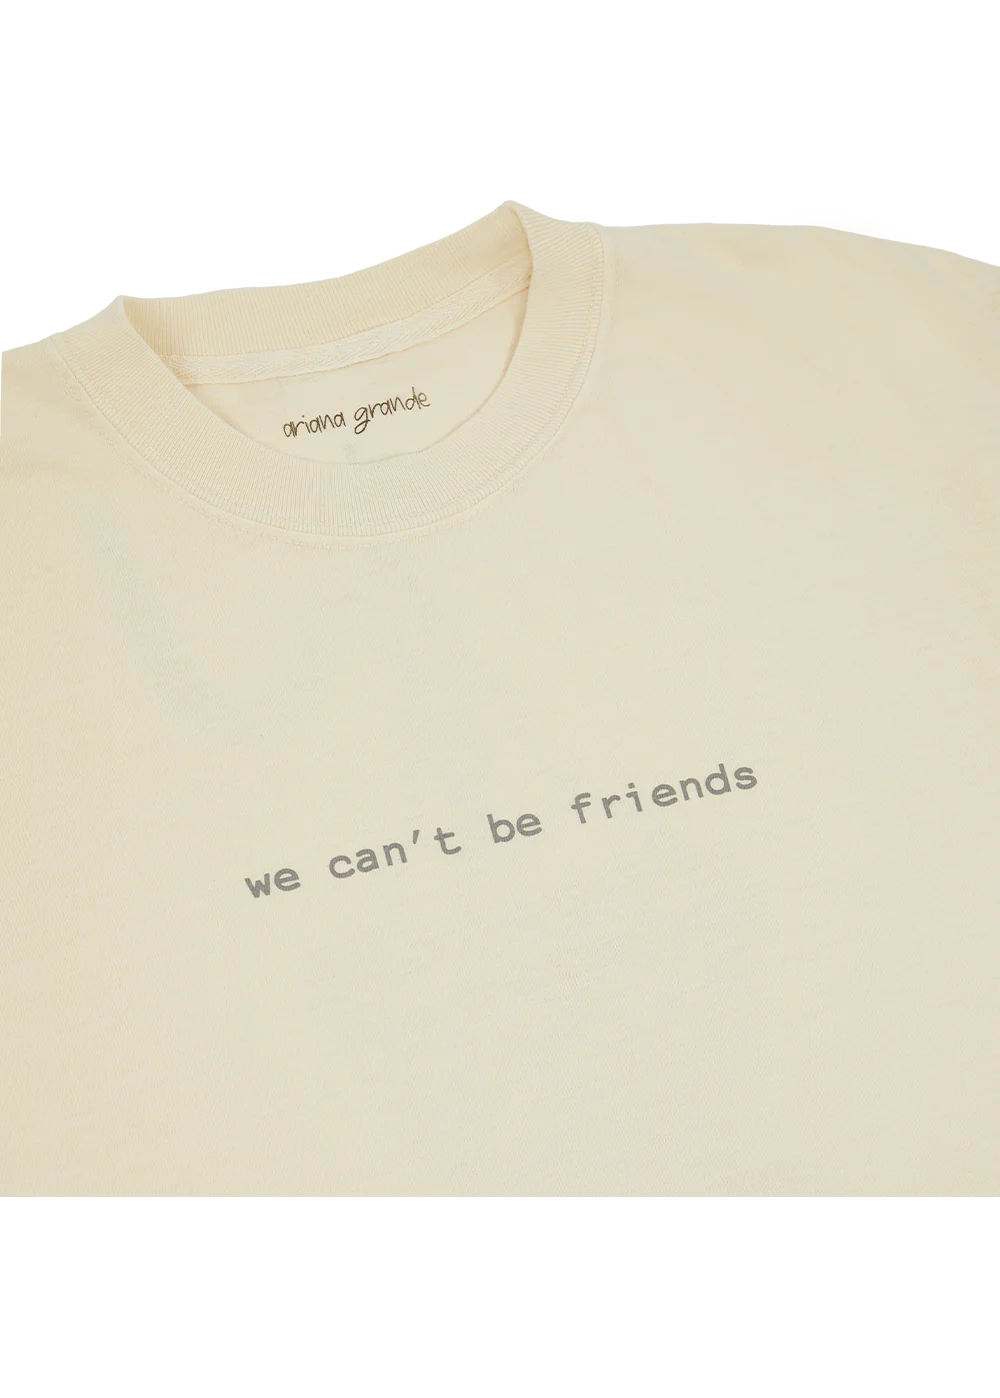 Ariana Grande - we can't be friends t-shirt